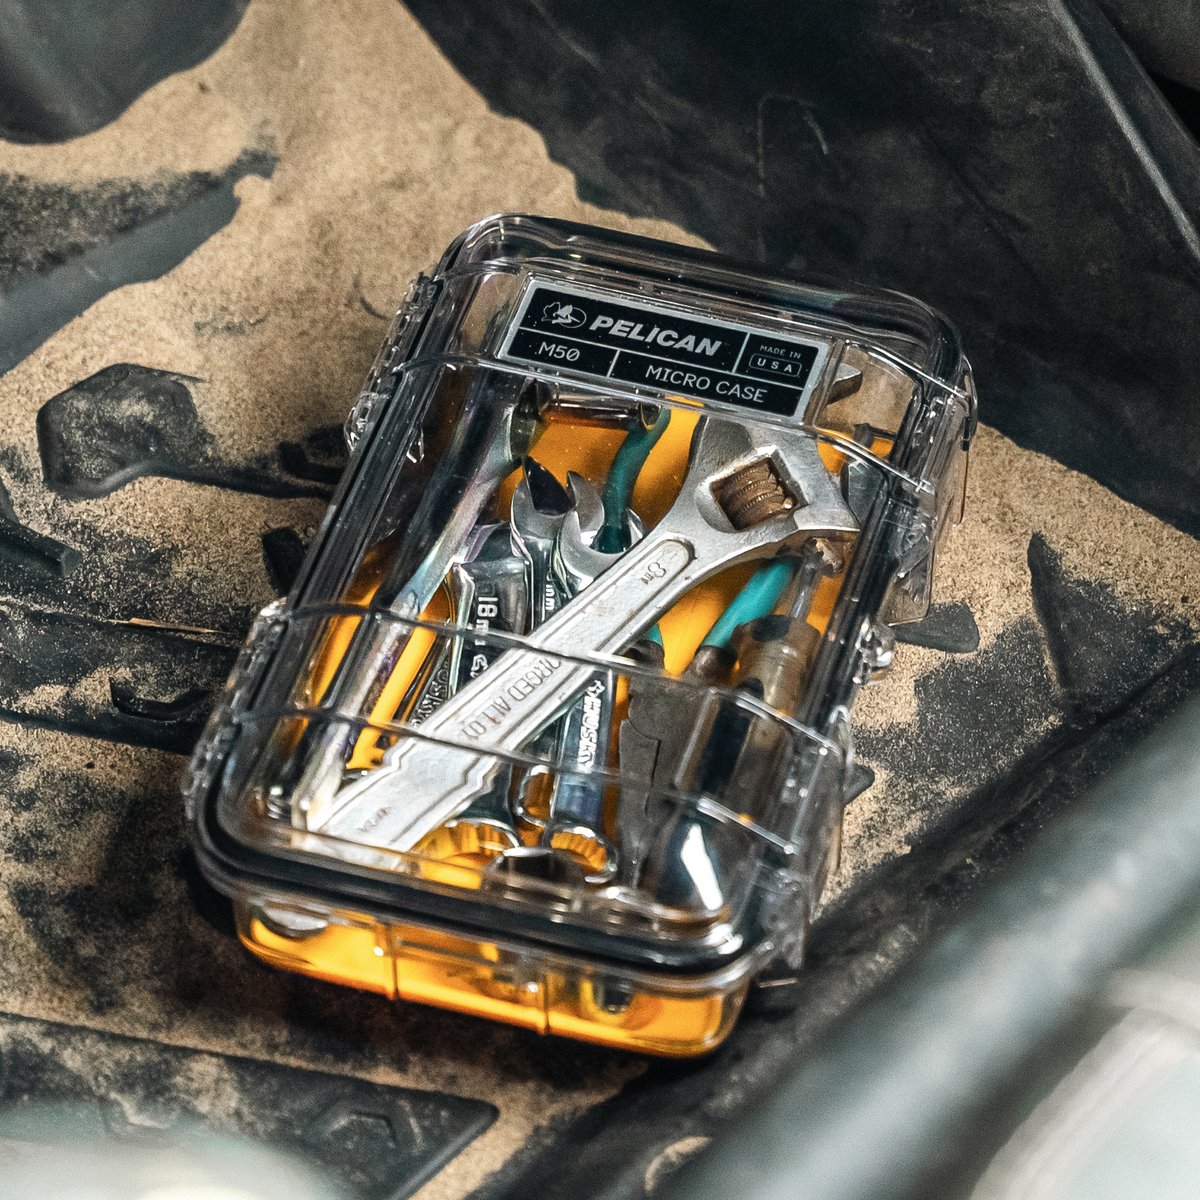 Built to protect your compact essential items while on the go. The Micro Case series is waterproof, crushproof, and dustproof and comes with a lifetime guarantee, ensuring your gear is protected in any terrain. #pelicanproducts #builttoprotect